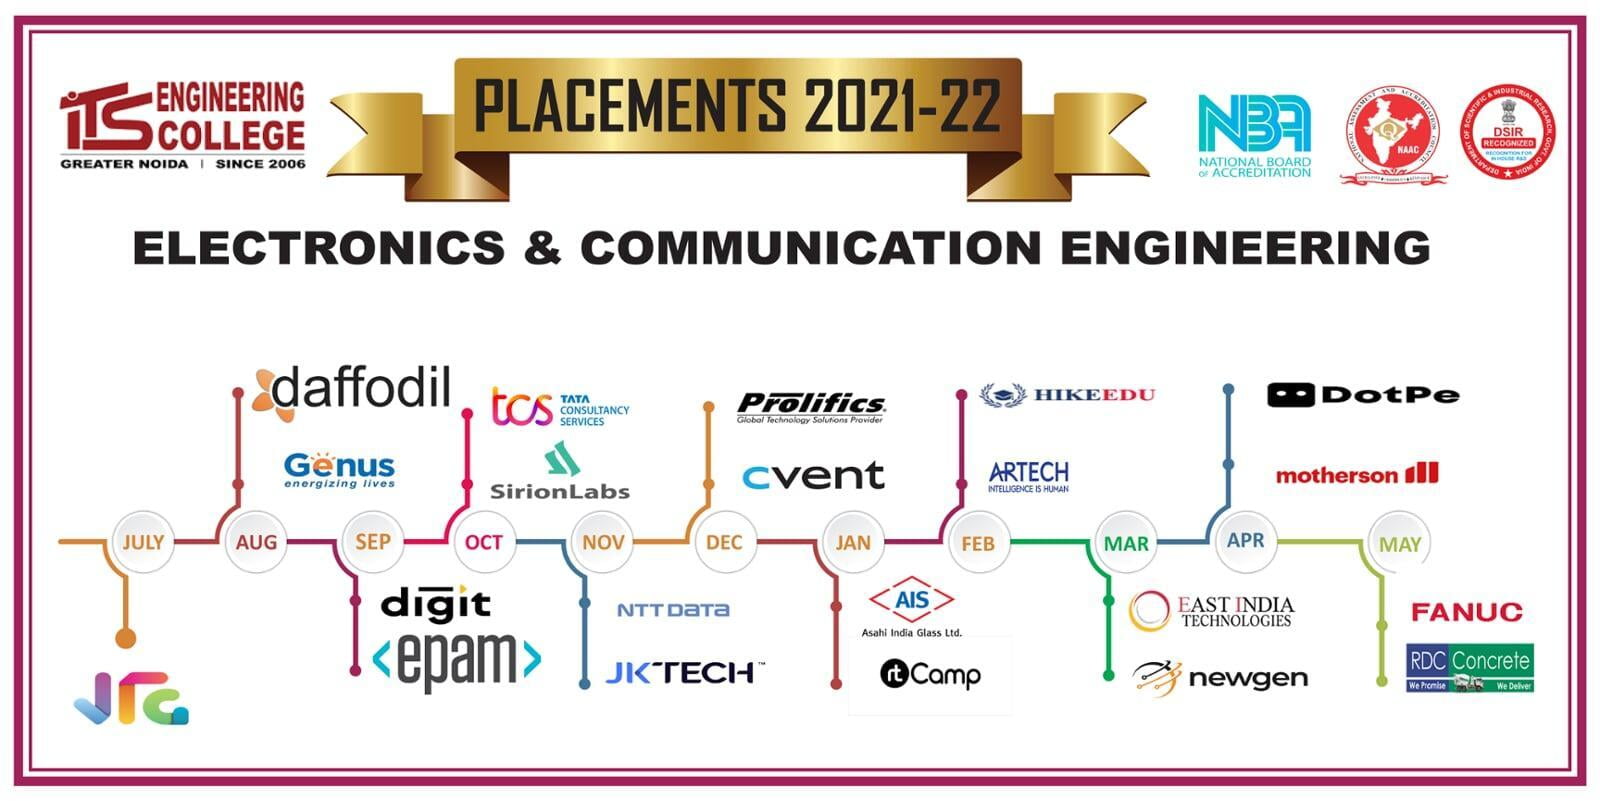 Electronics & Communication Engineering Recruiters 2022 ITS Engineering College